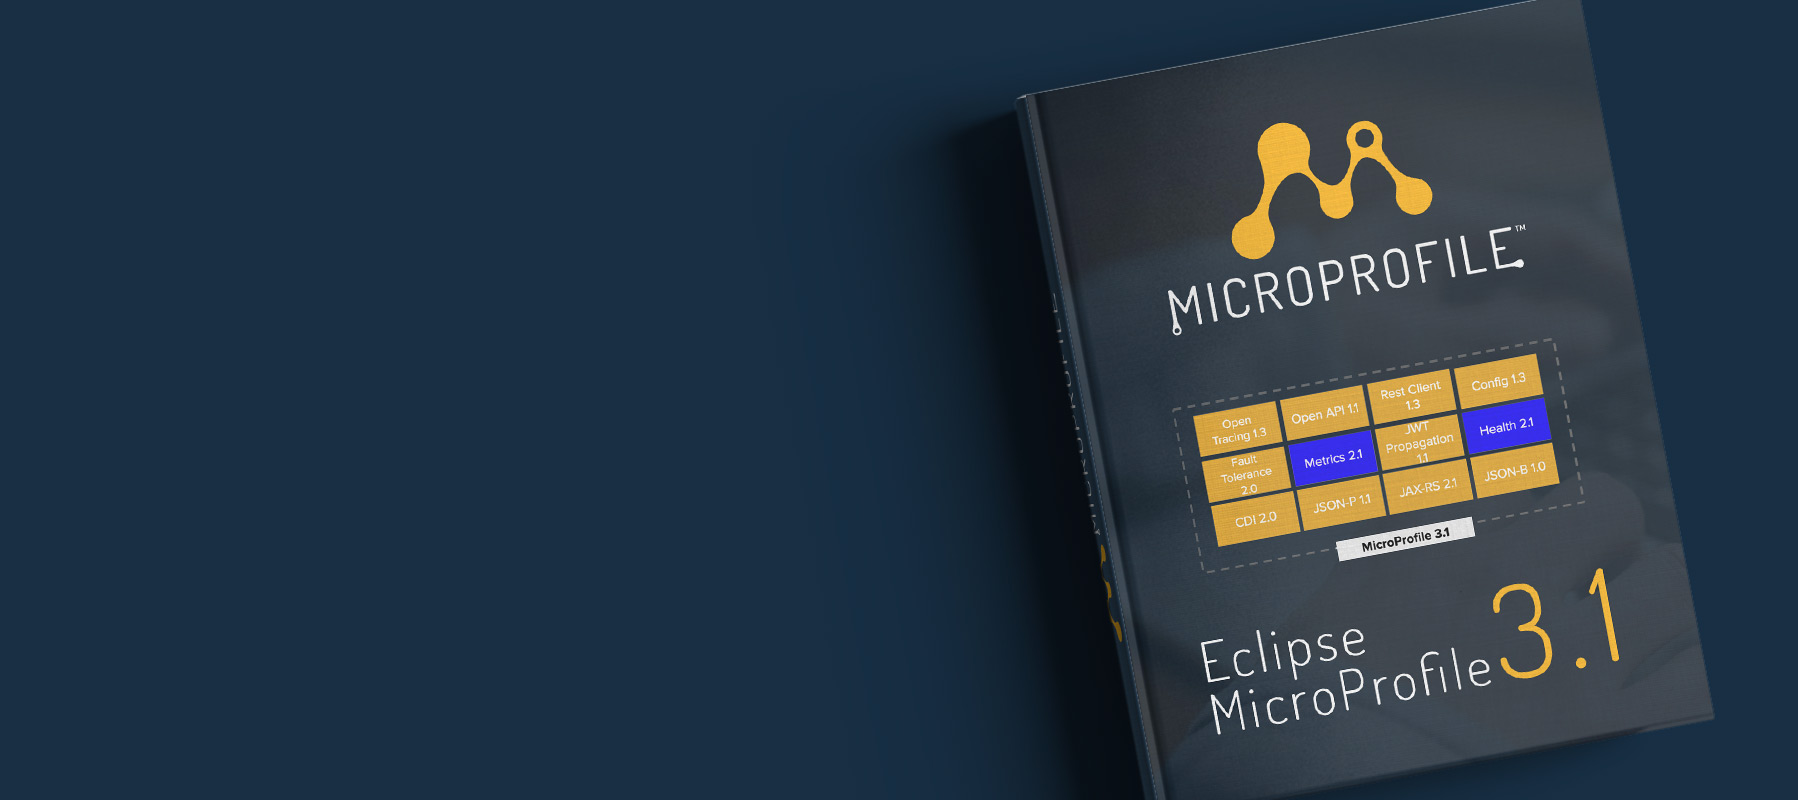 Eclipse MicroProfile 3.1 is Now Available